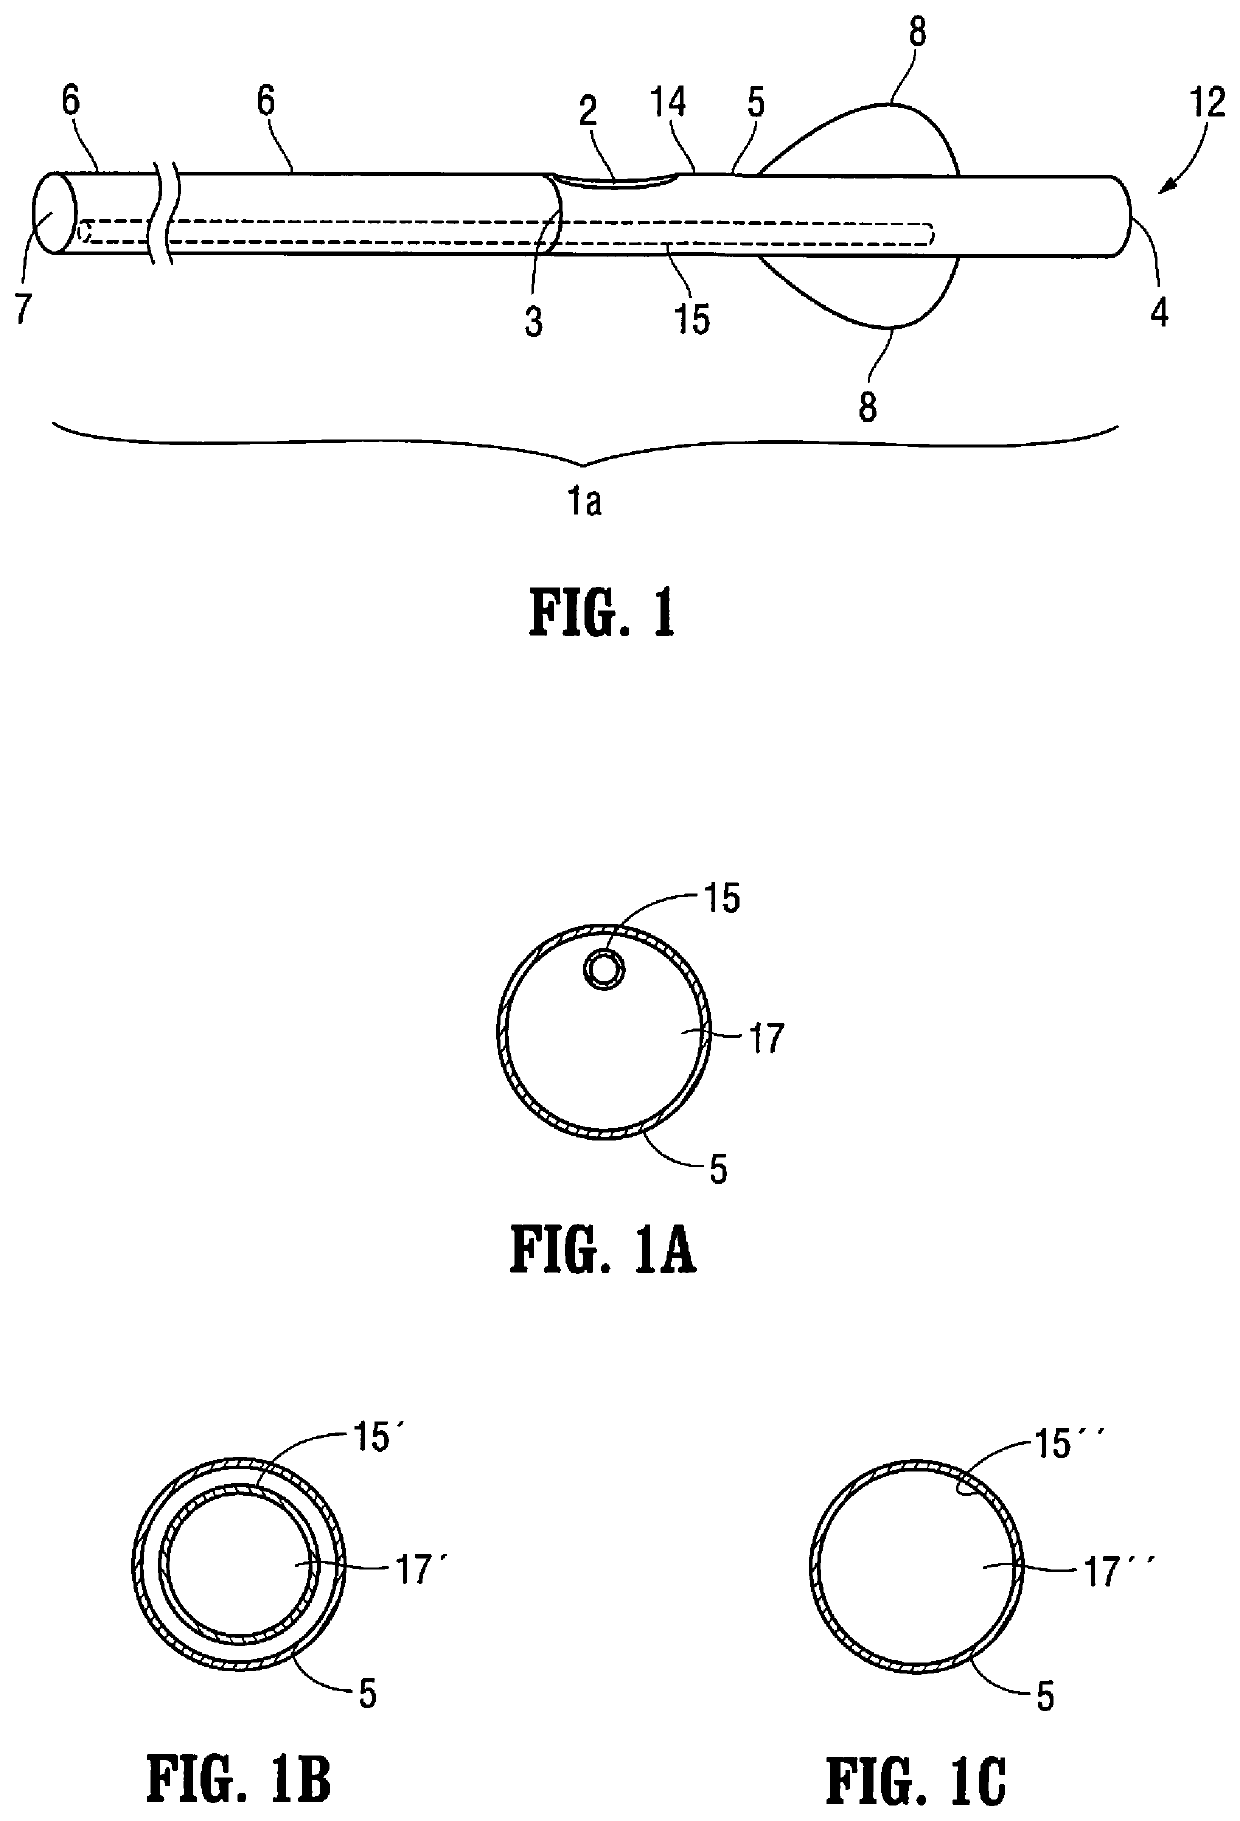 Torus balloon with energy emitters for intravascular lithotripsy